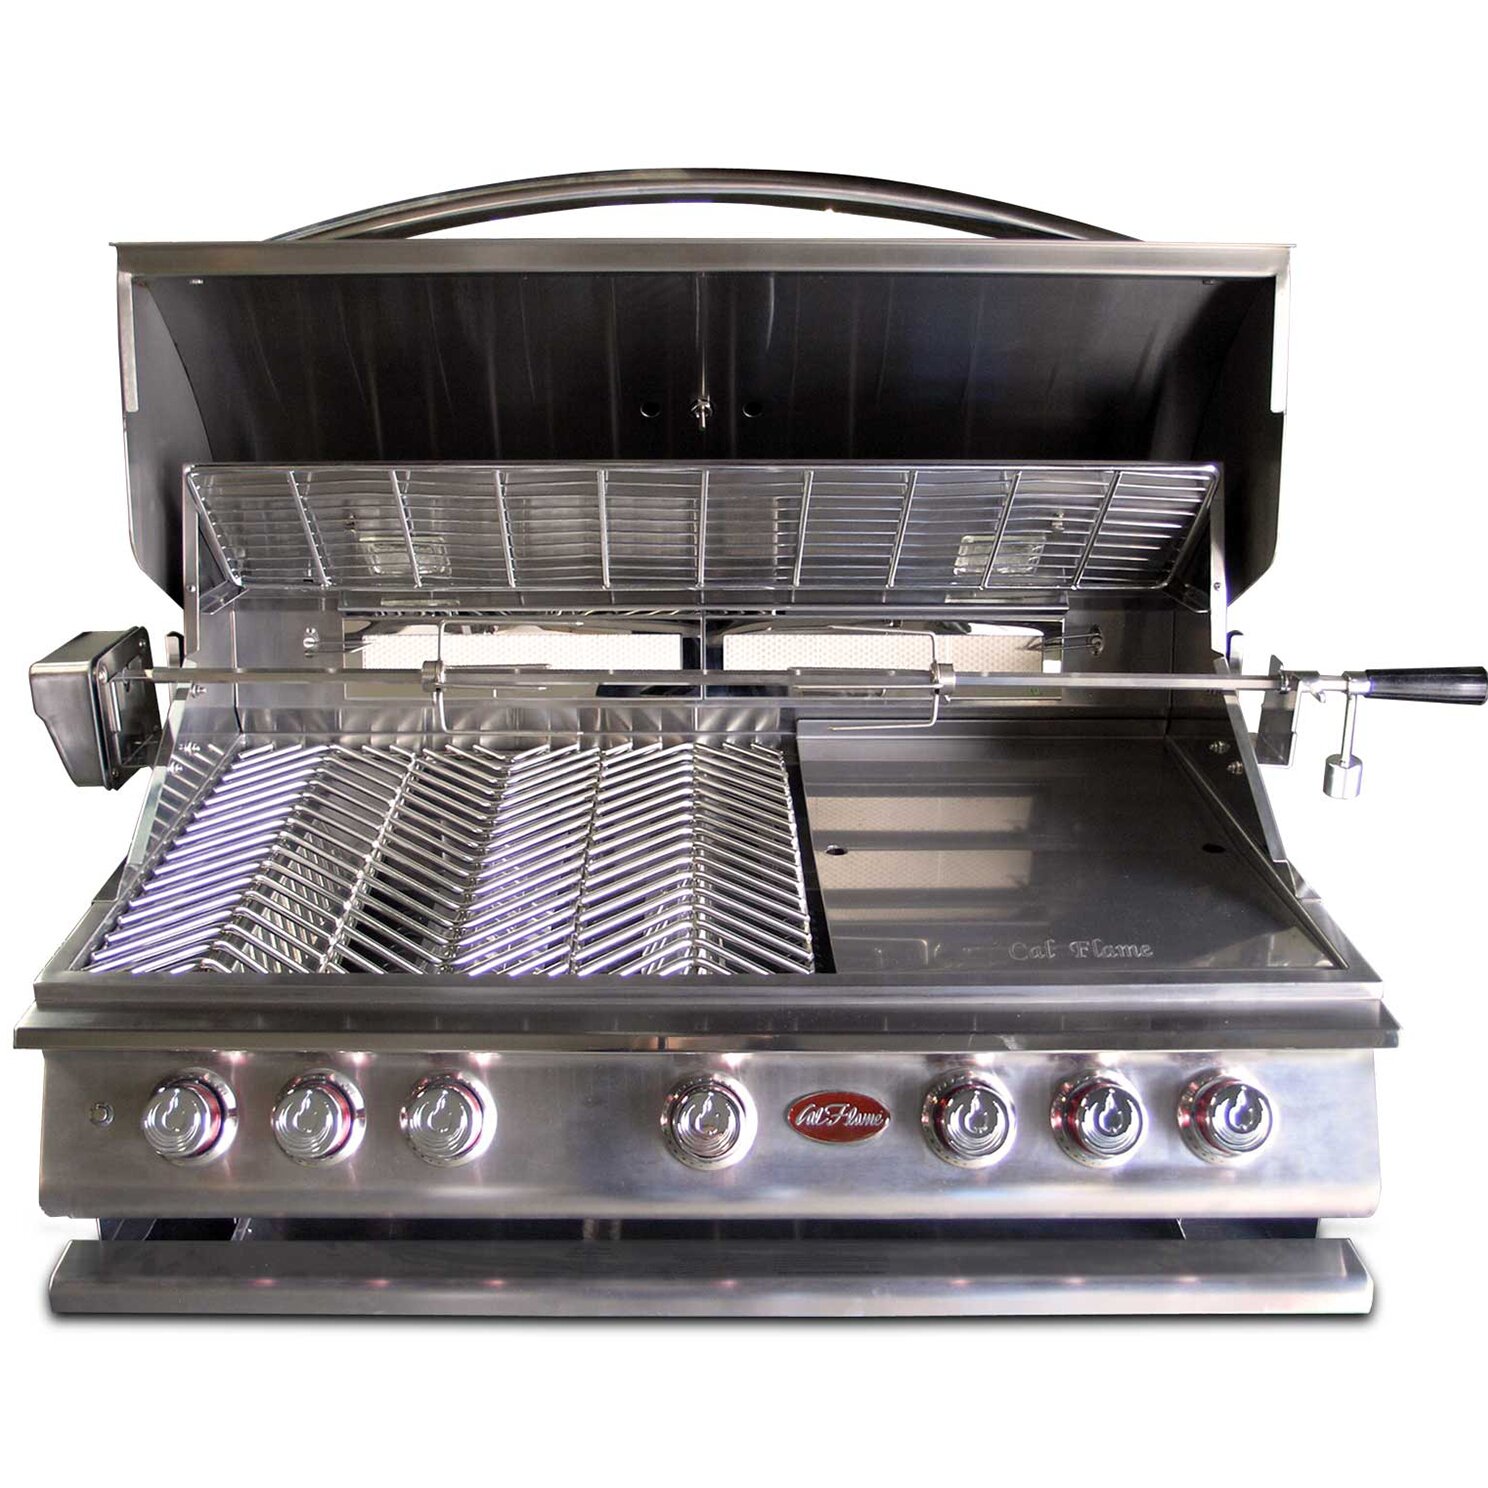 Calflame Built In Propane Gas Grill With Rotisserie Wayfair